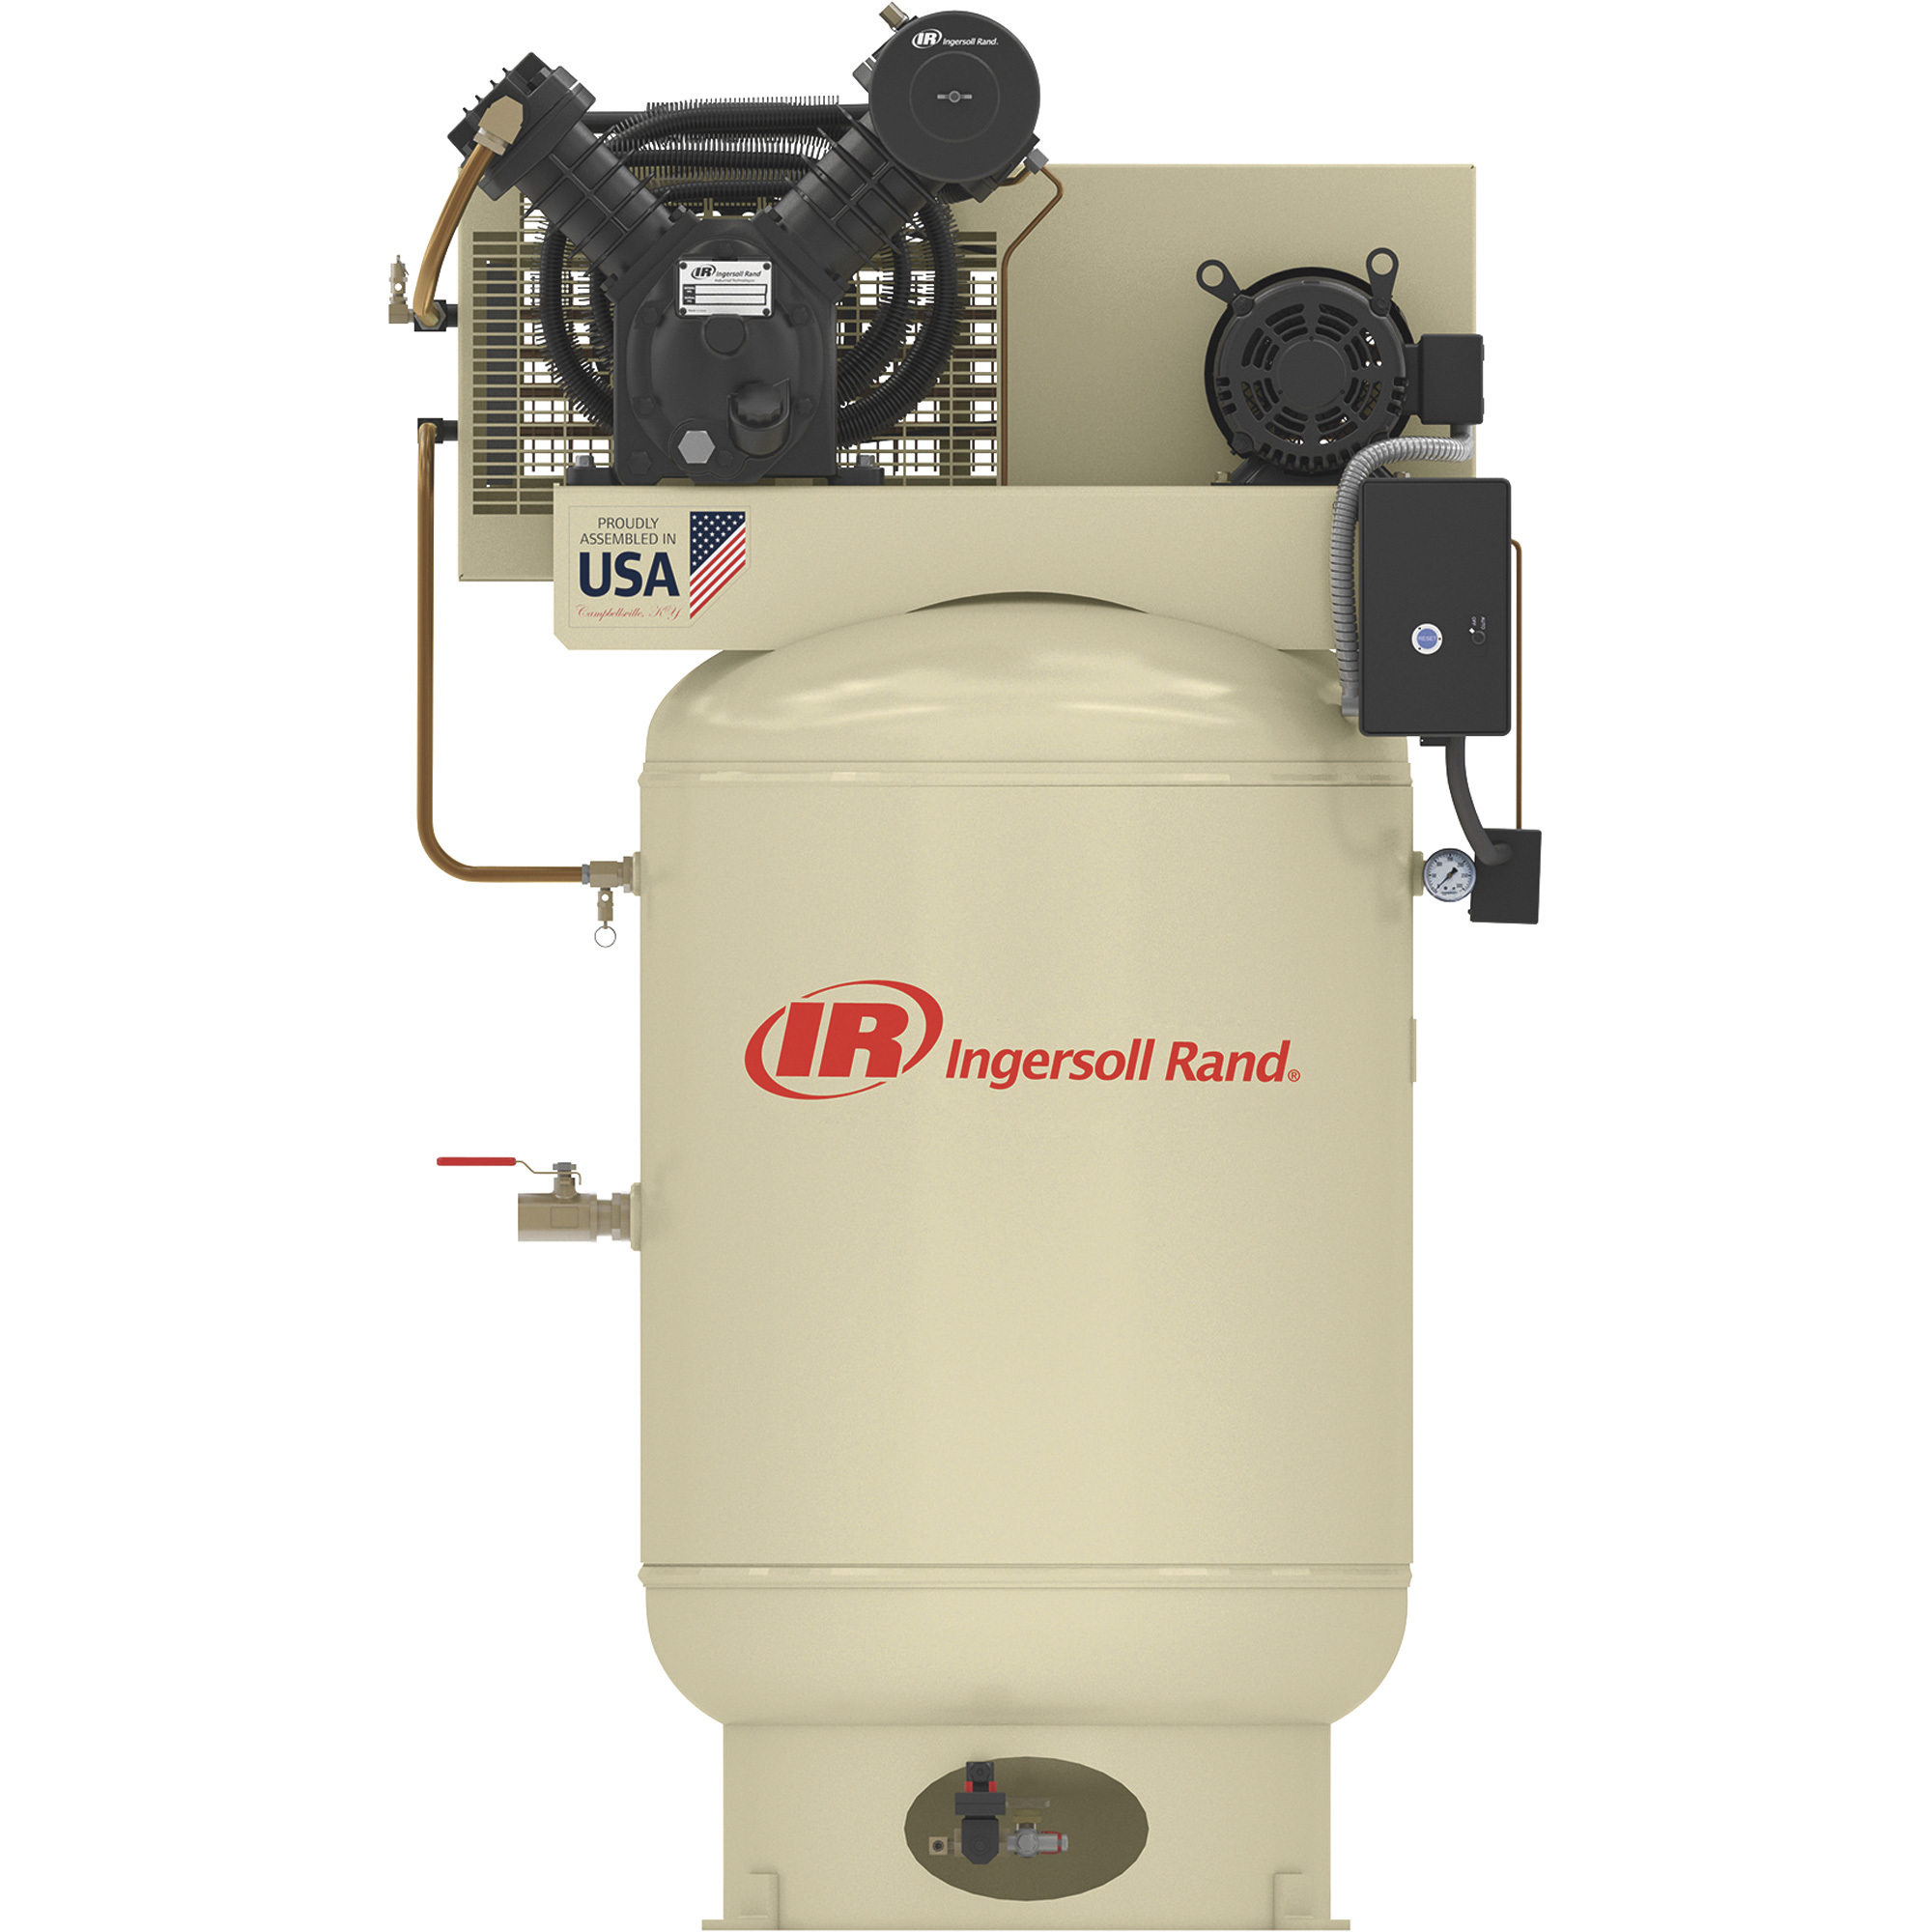 Ingersoll Rand Electric Two-Stage Air Compressor, Premium Value Package, 10 HP, 200 Volt, 3-Phase, 120 Gallon Vertical, Model 2545K10-VP